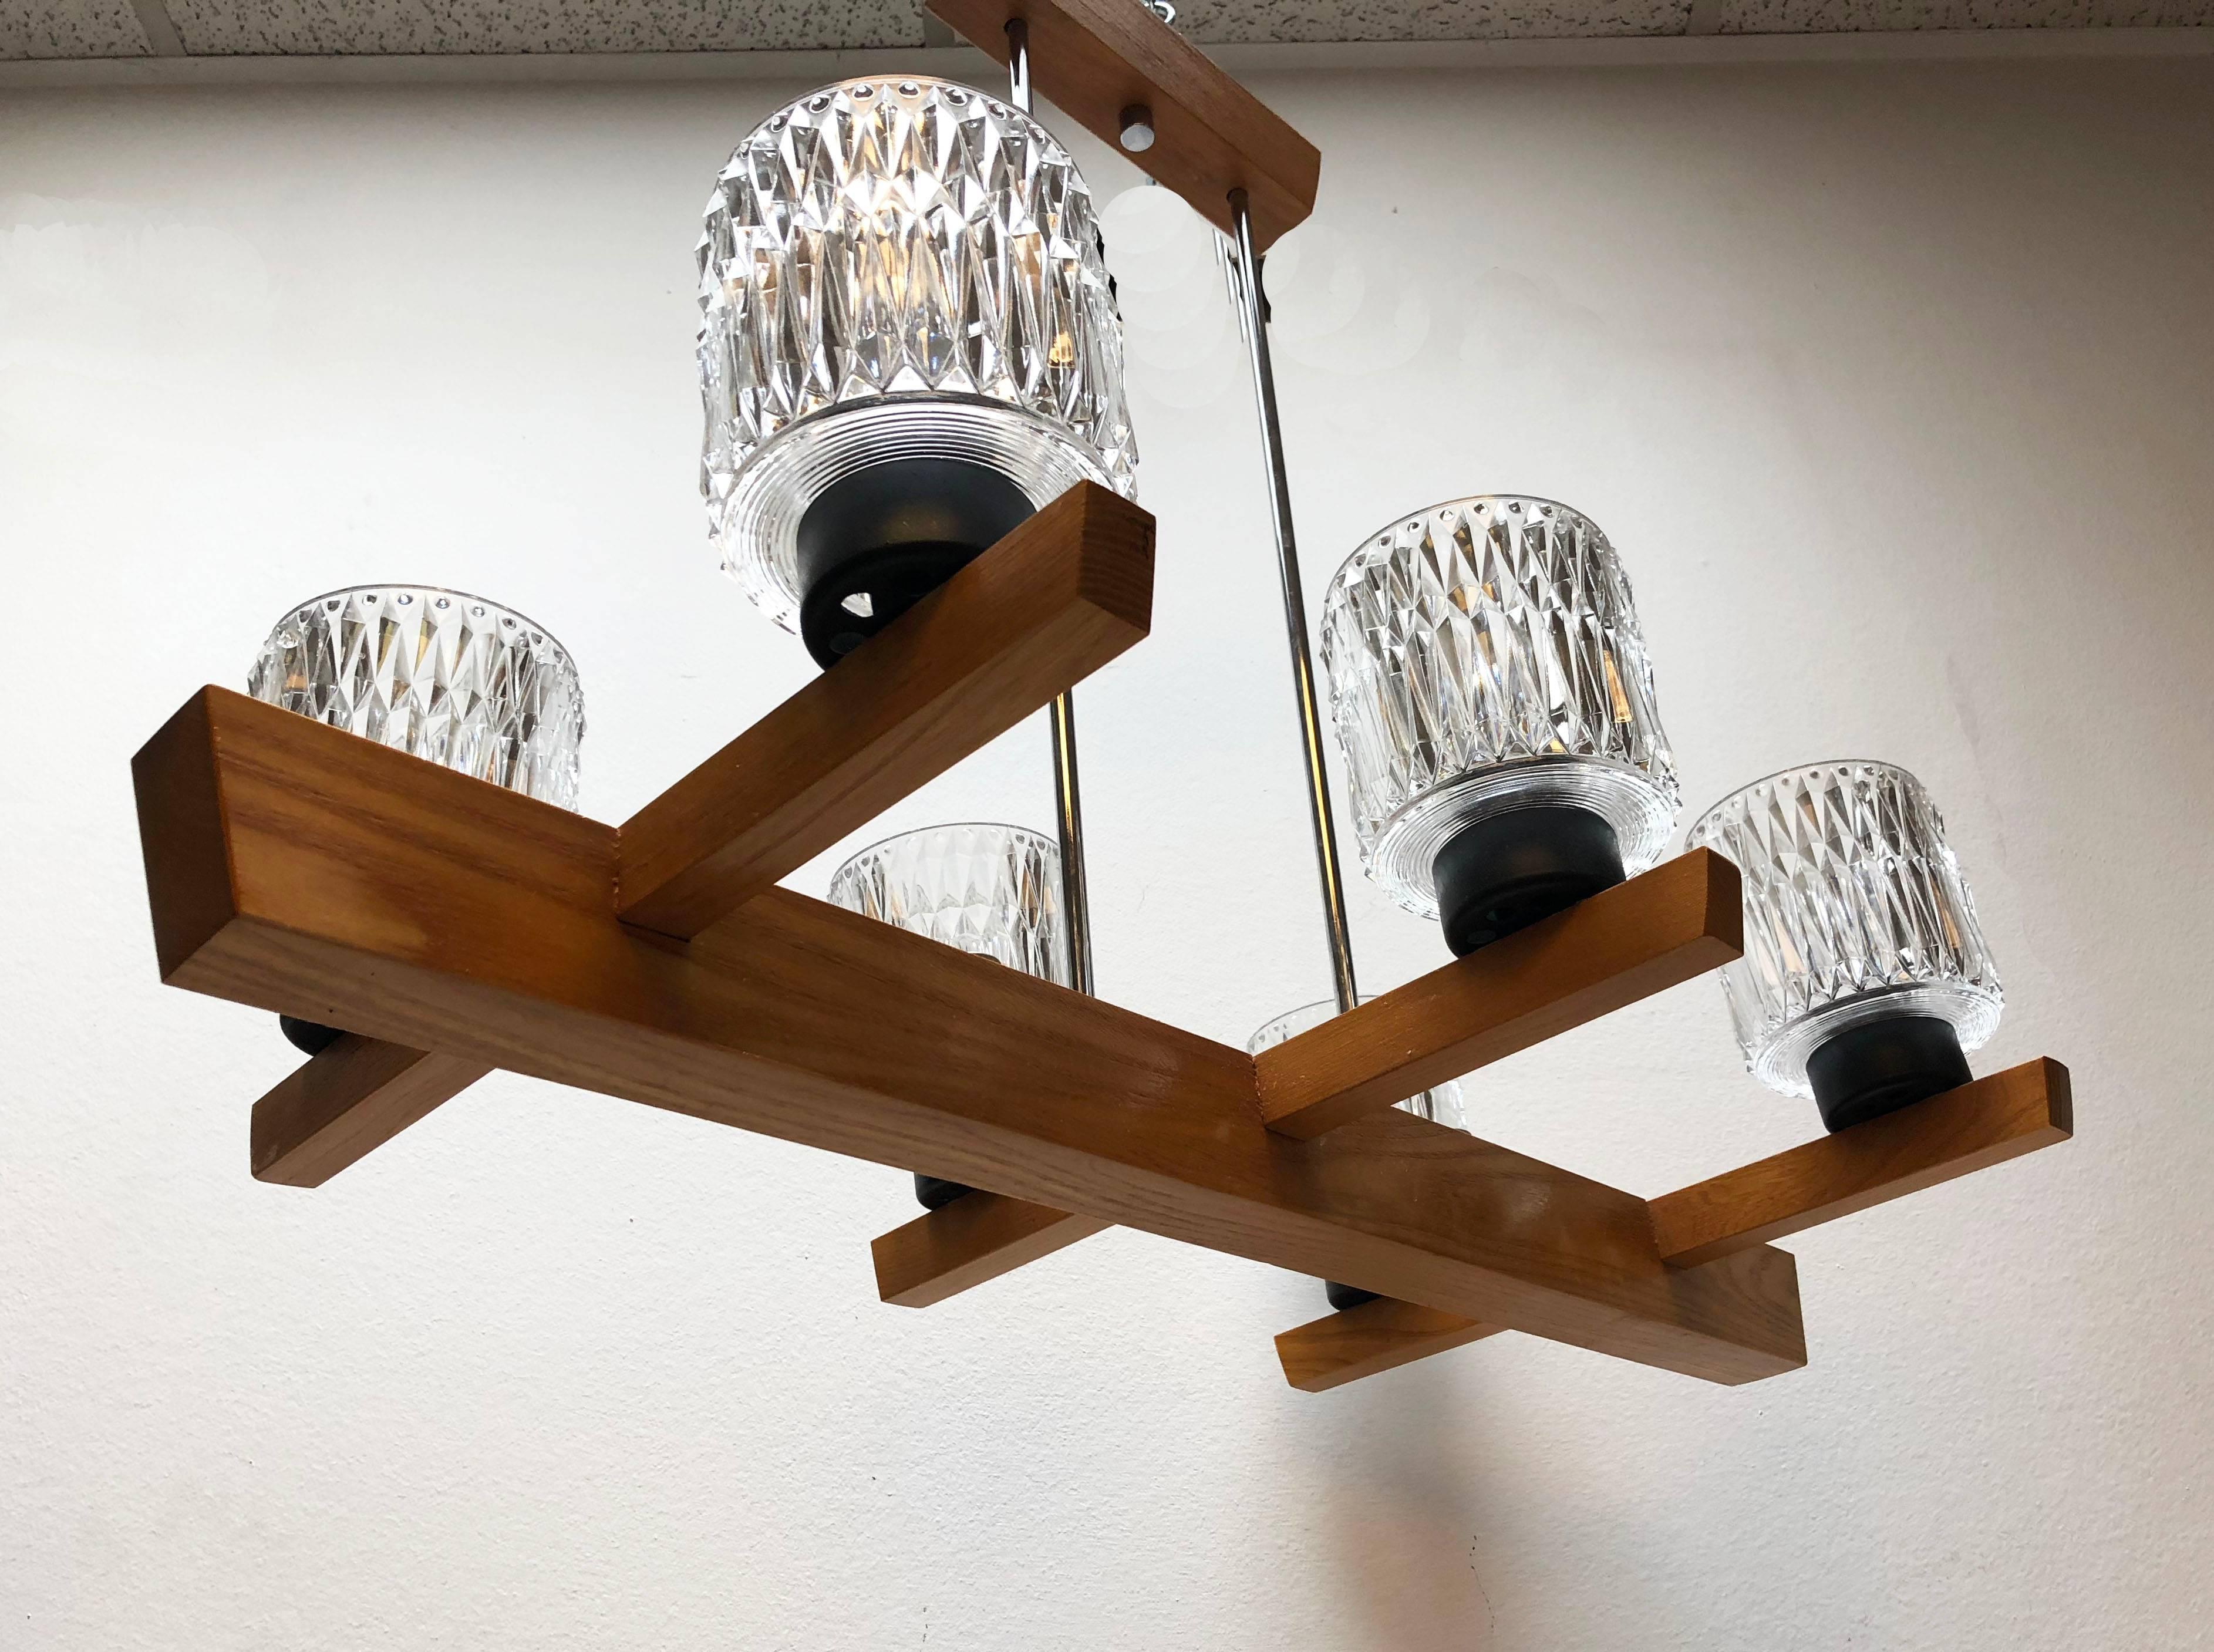 Wood strip with six glass shade mounted on the steel holder and fitted with E27 bulbs.
Made in style of Kalmar in the 1950s.